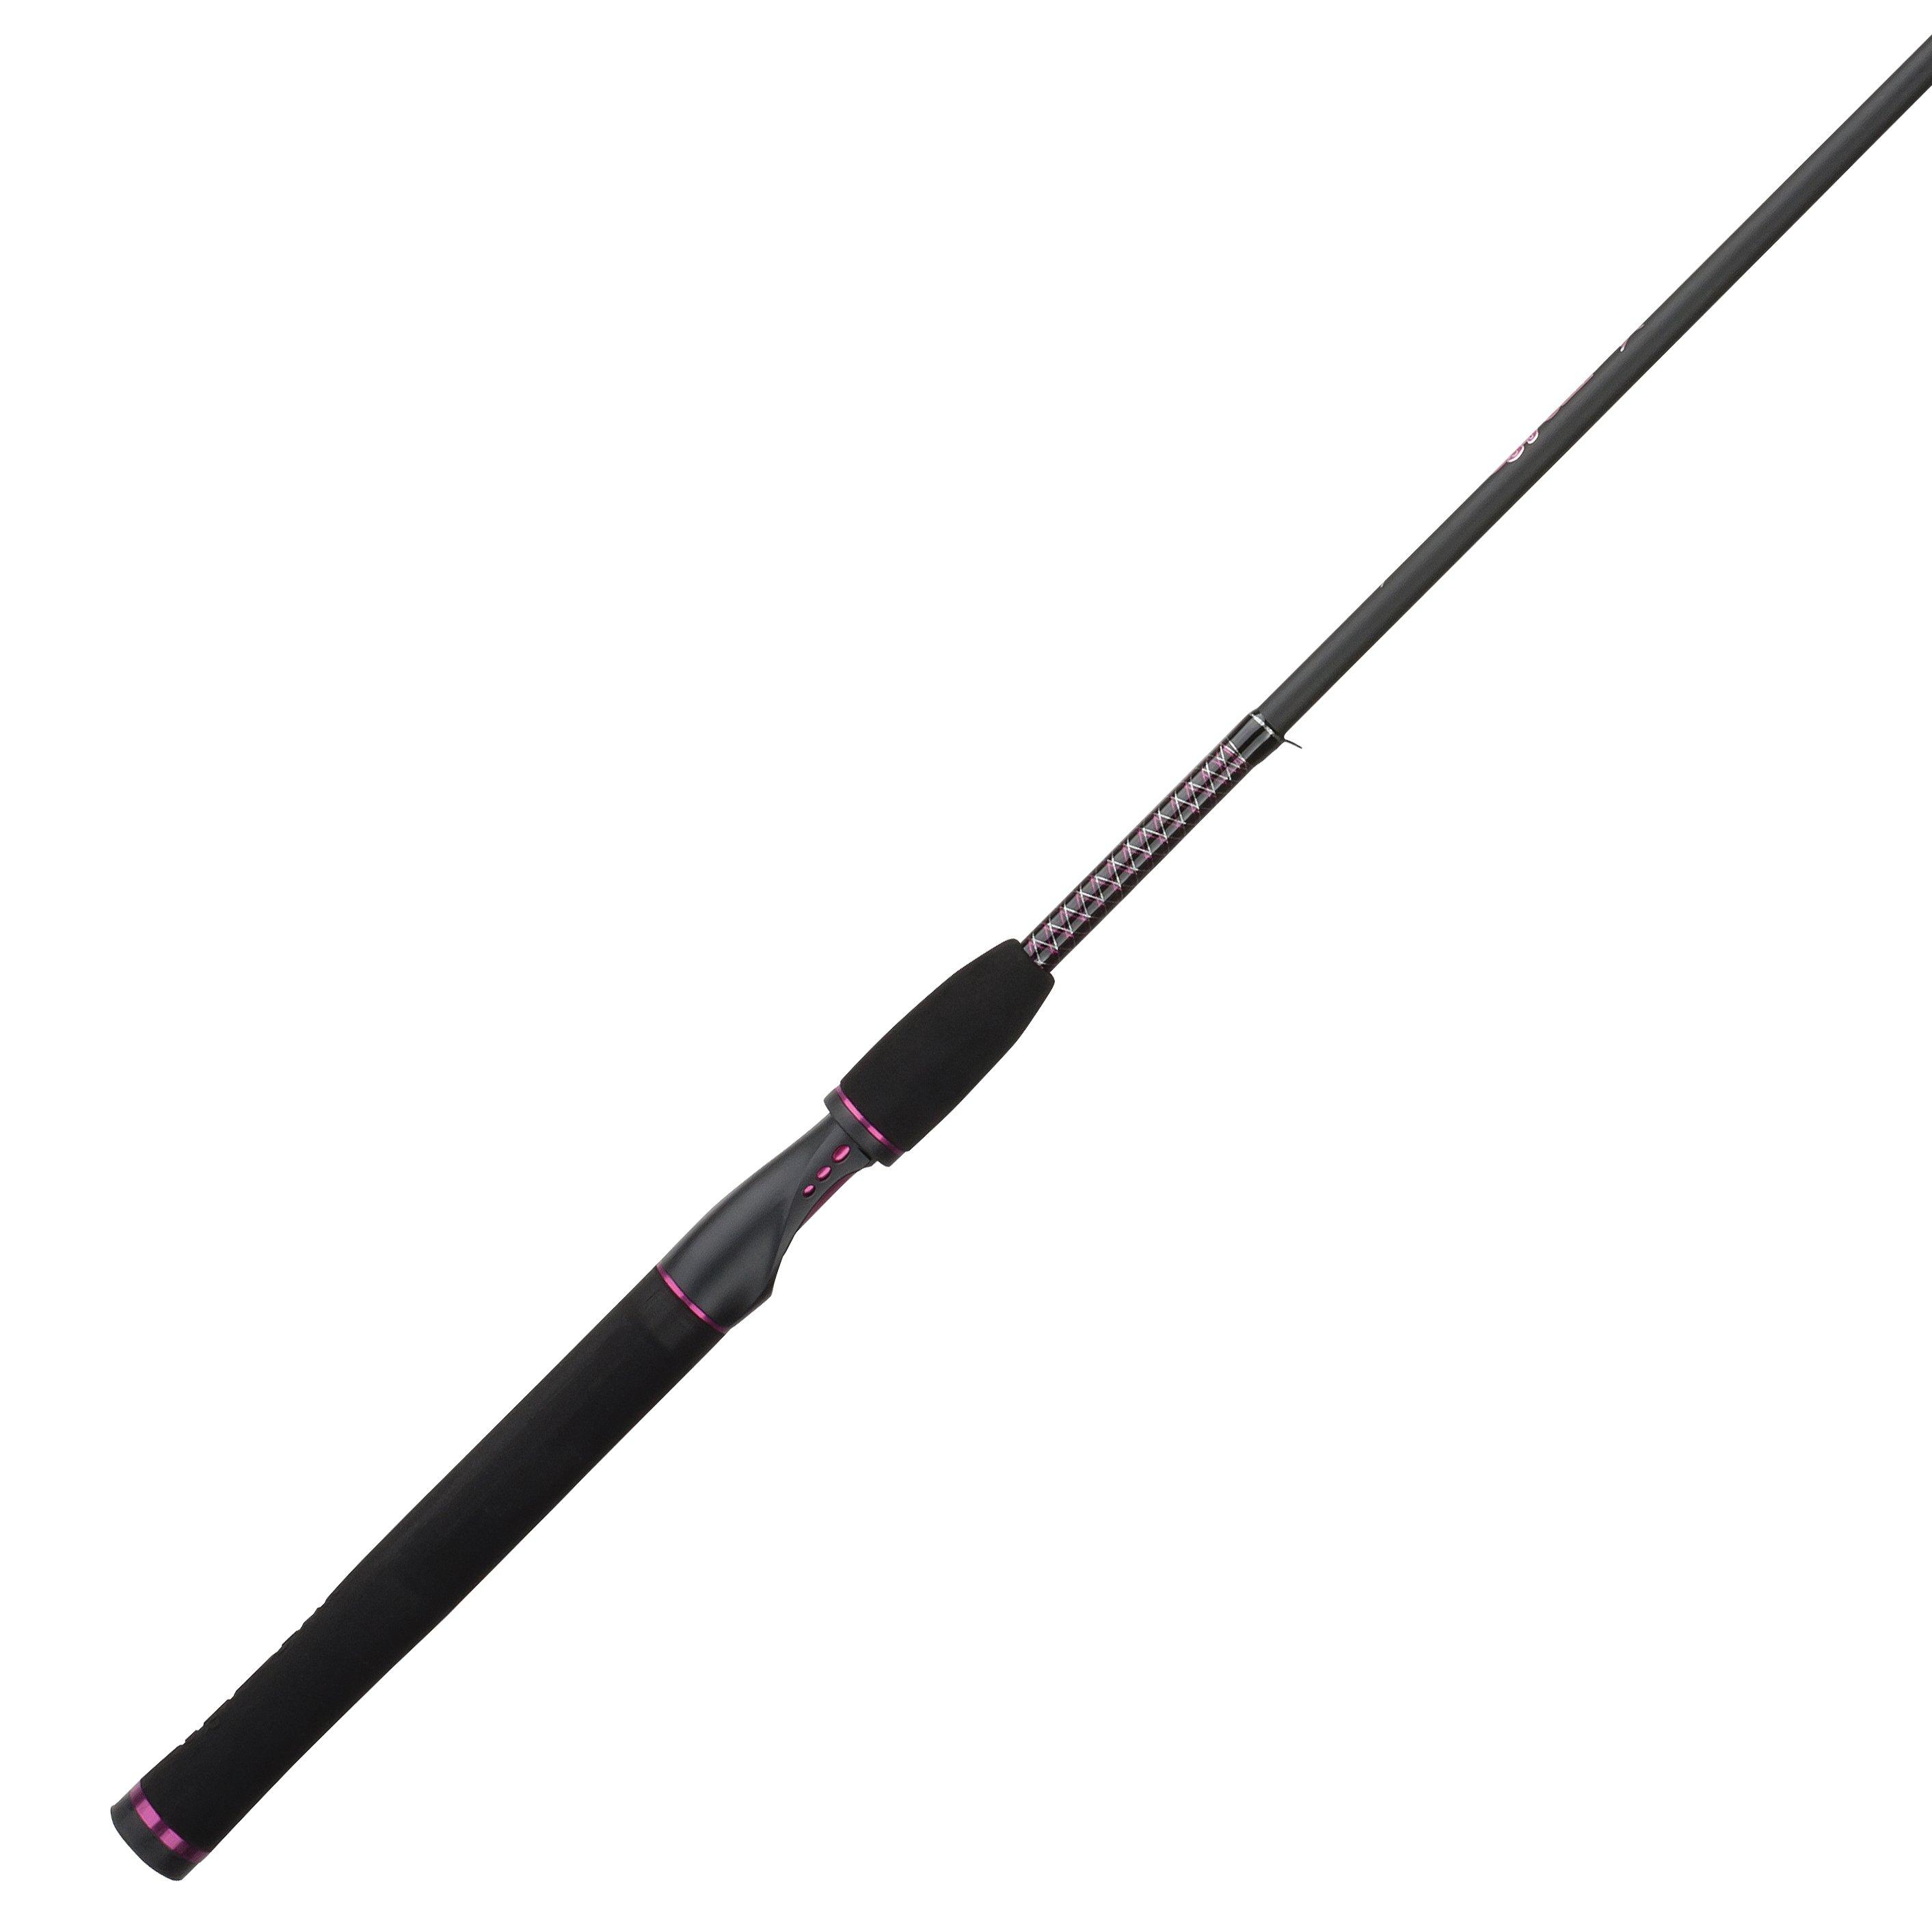 Ugly Stik 5’6” GX2 Spincast Ladies Fishing Rod and Reel Spinning Combo, Ugly Tech Construction with Clear Tip Design, 5’6” 2-Piece Rod